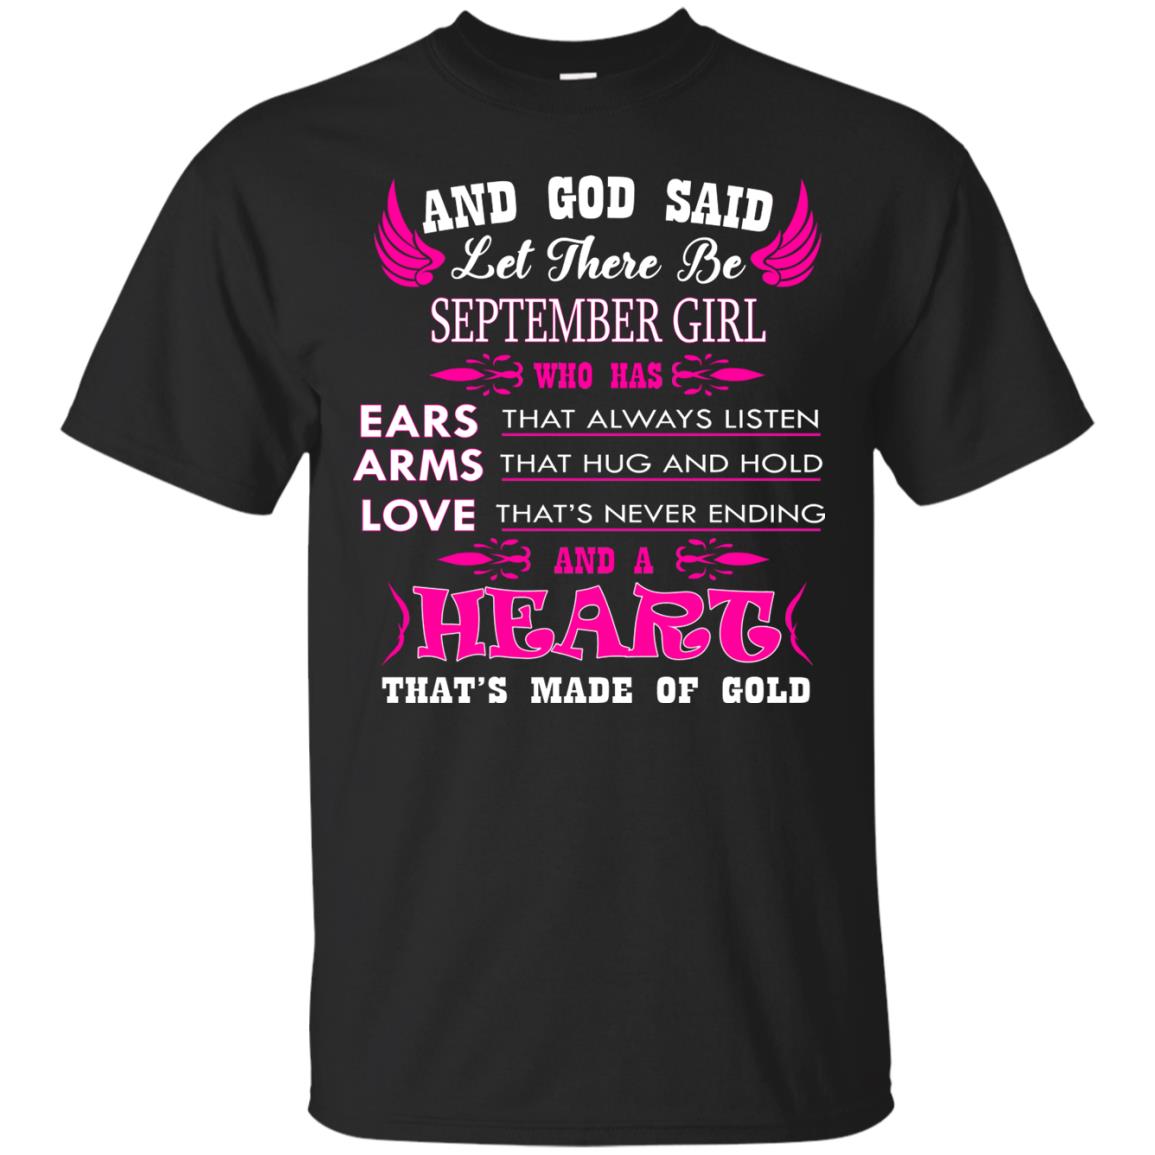 And God Said Let There Be September Girl Who Has Ears - Arms - Love Shirt